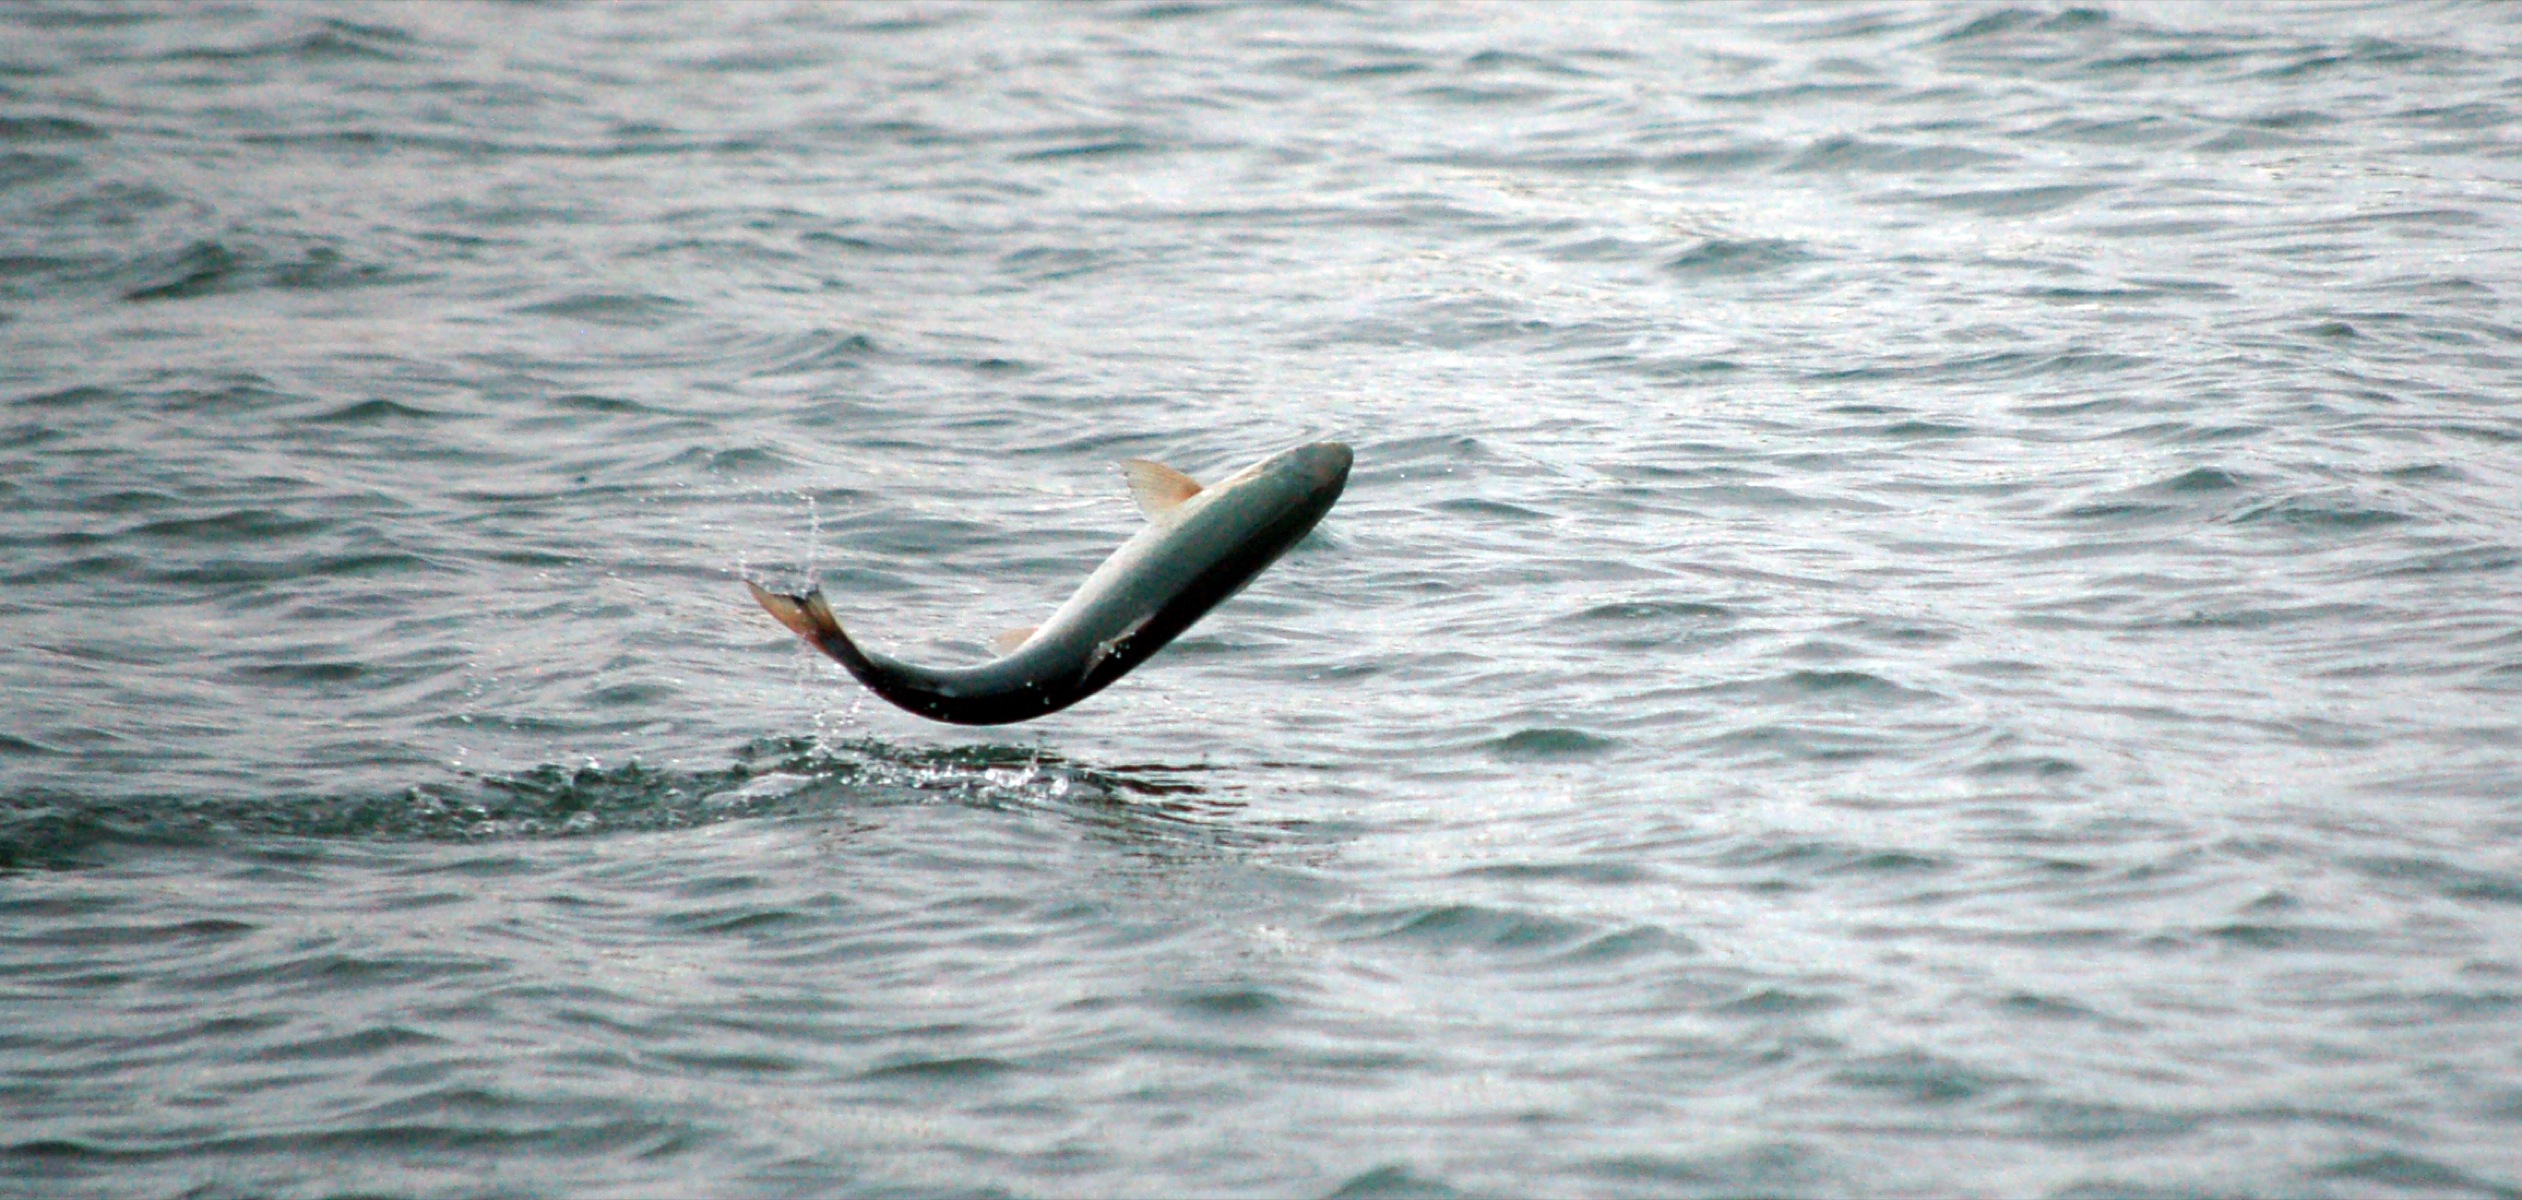 A silver salmon jumps Thursday afternoon at the Nick Dudiak Fishing Lagoon on the Homer Spit.-Photo by Michael Armstrong, Homer News